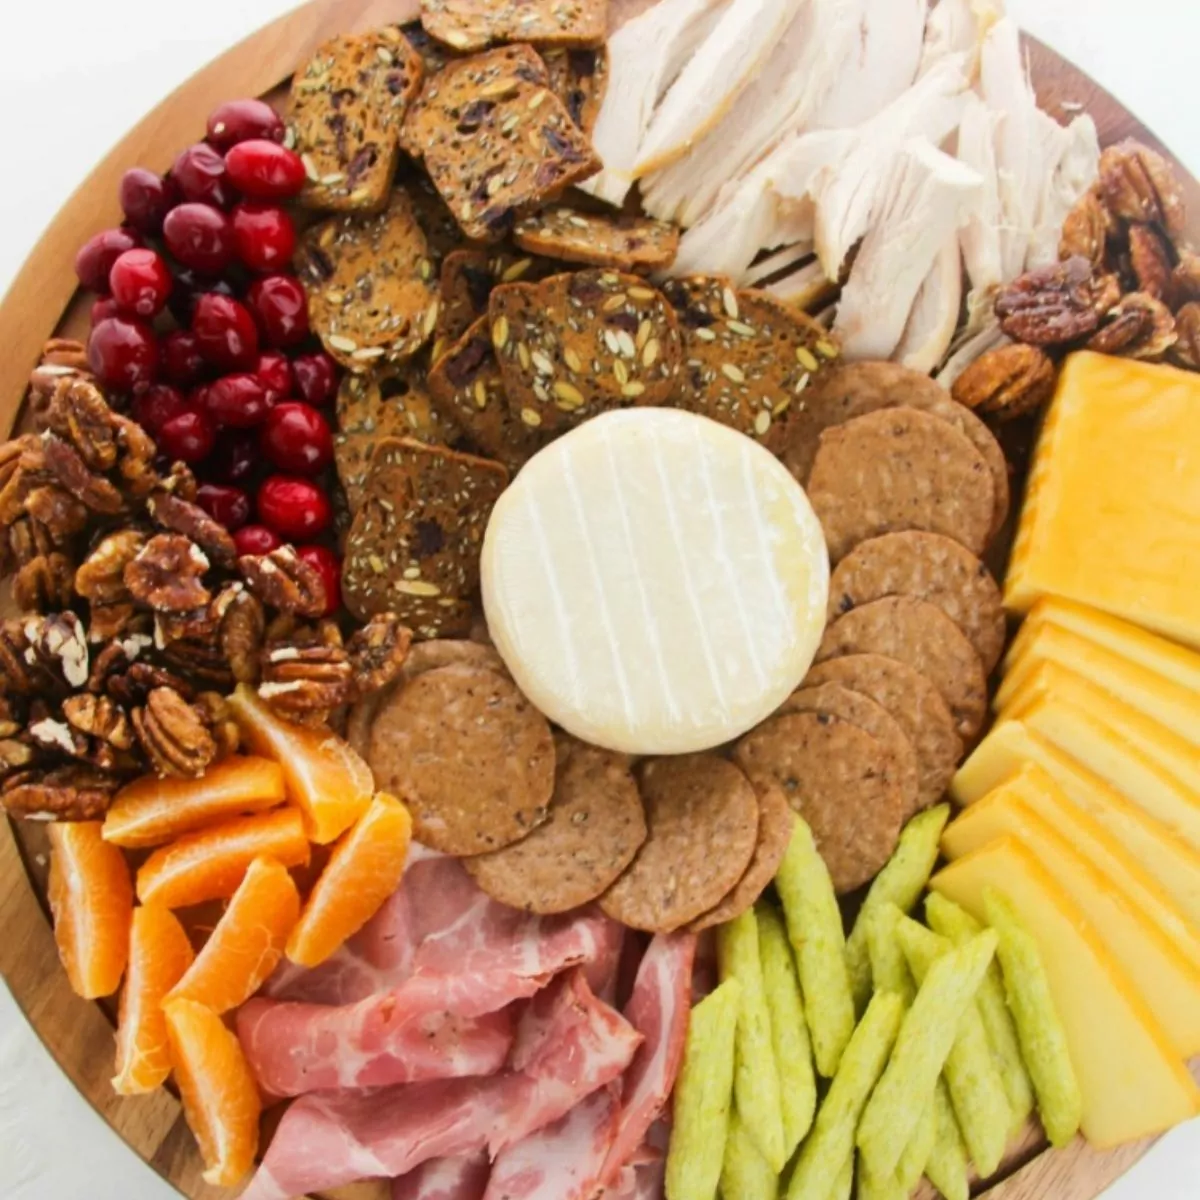 Snack Board with cheese, veggies and cured meats.